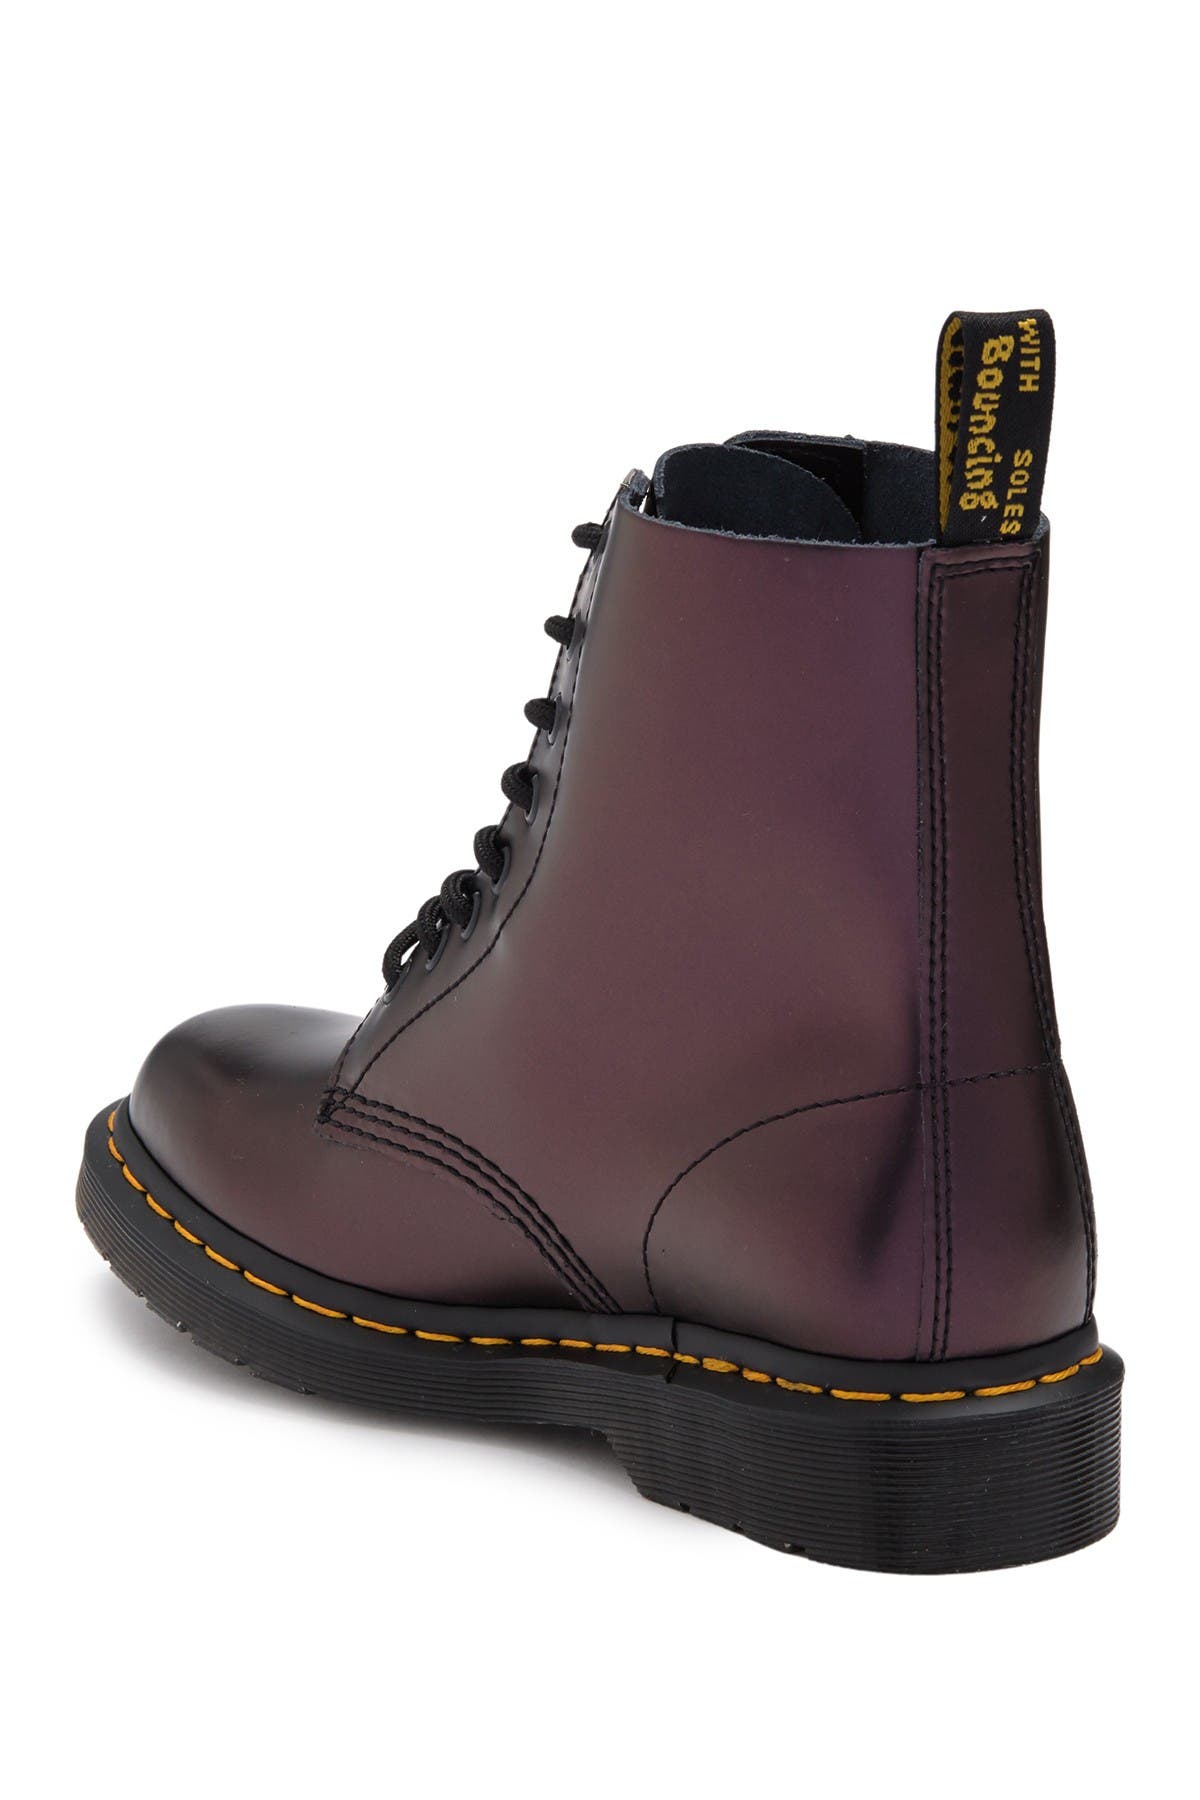 DR. MARTENS' 1460 PASCAL BOOT,190665348316